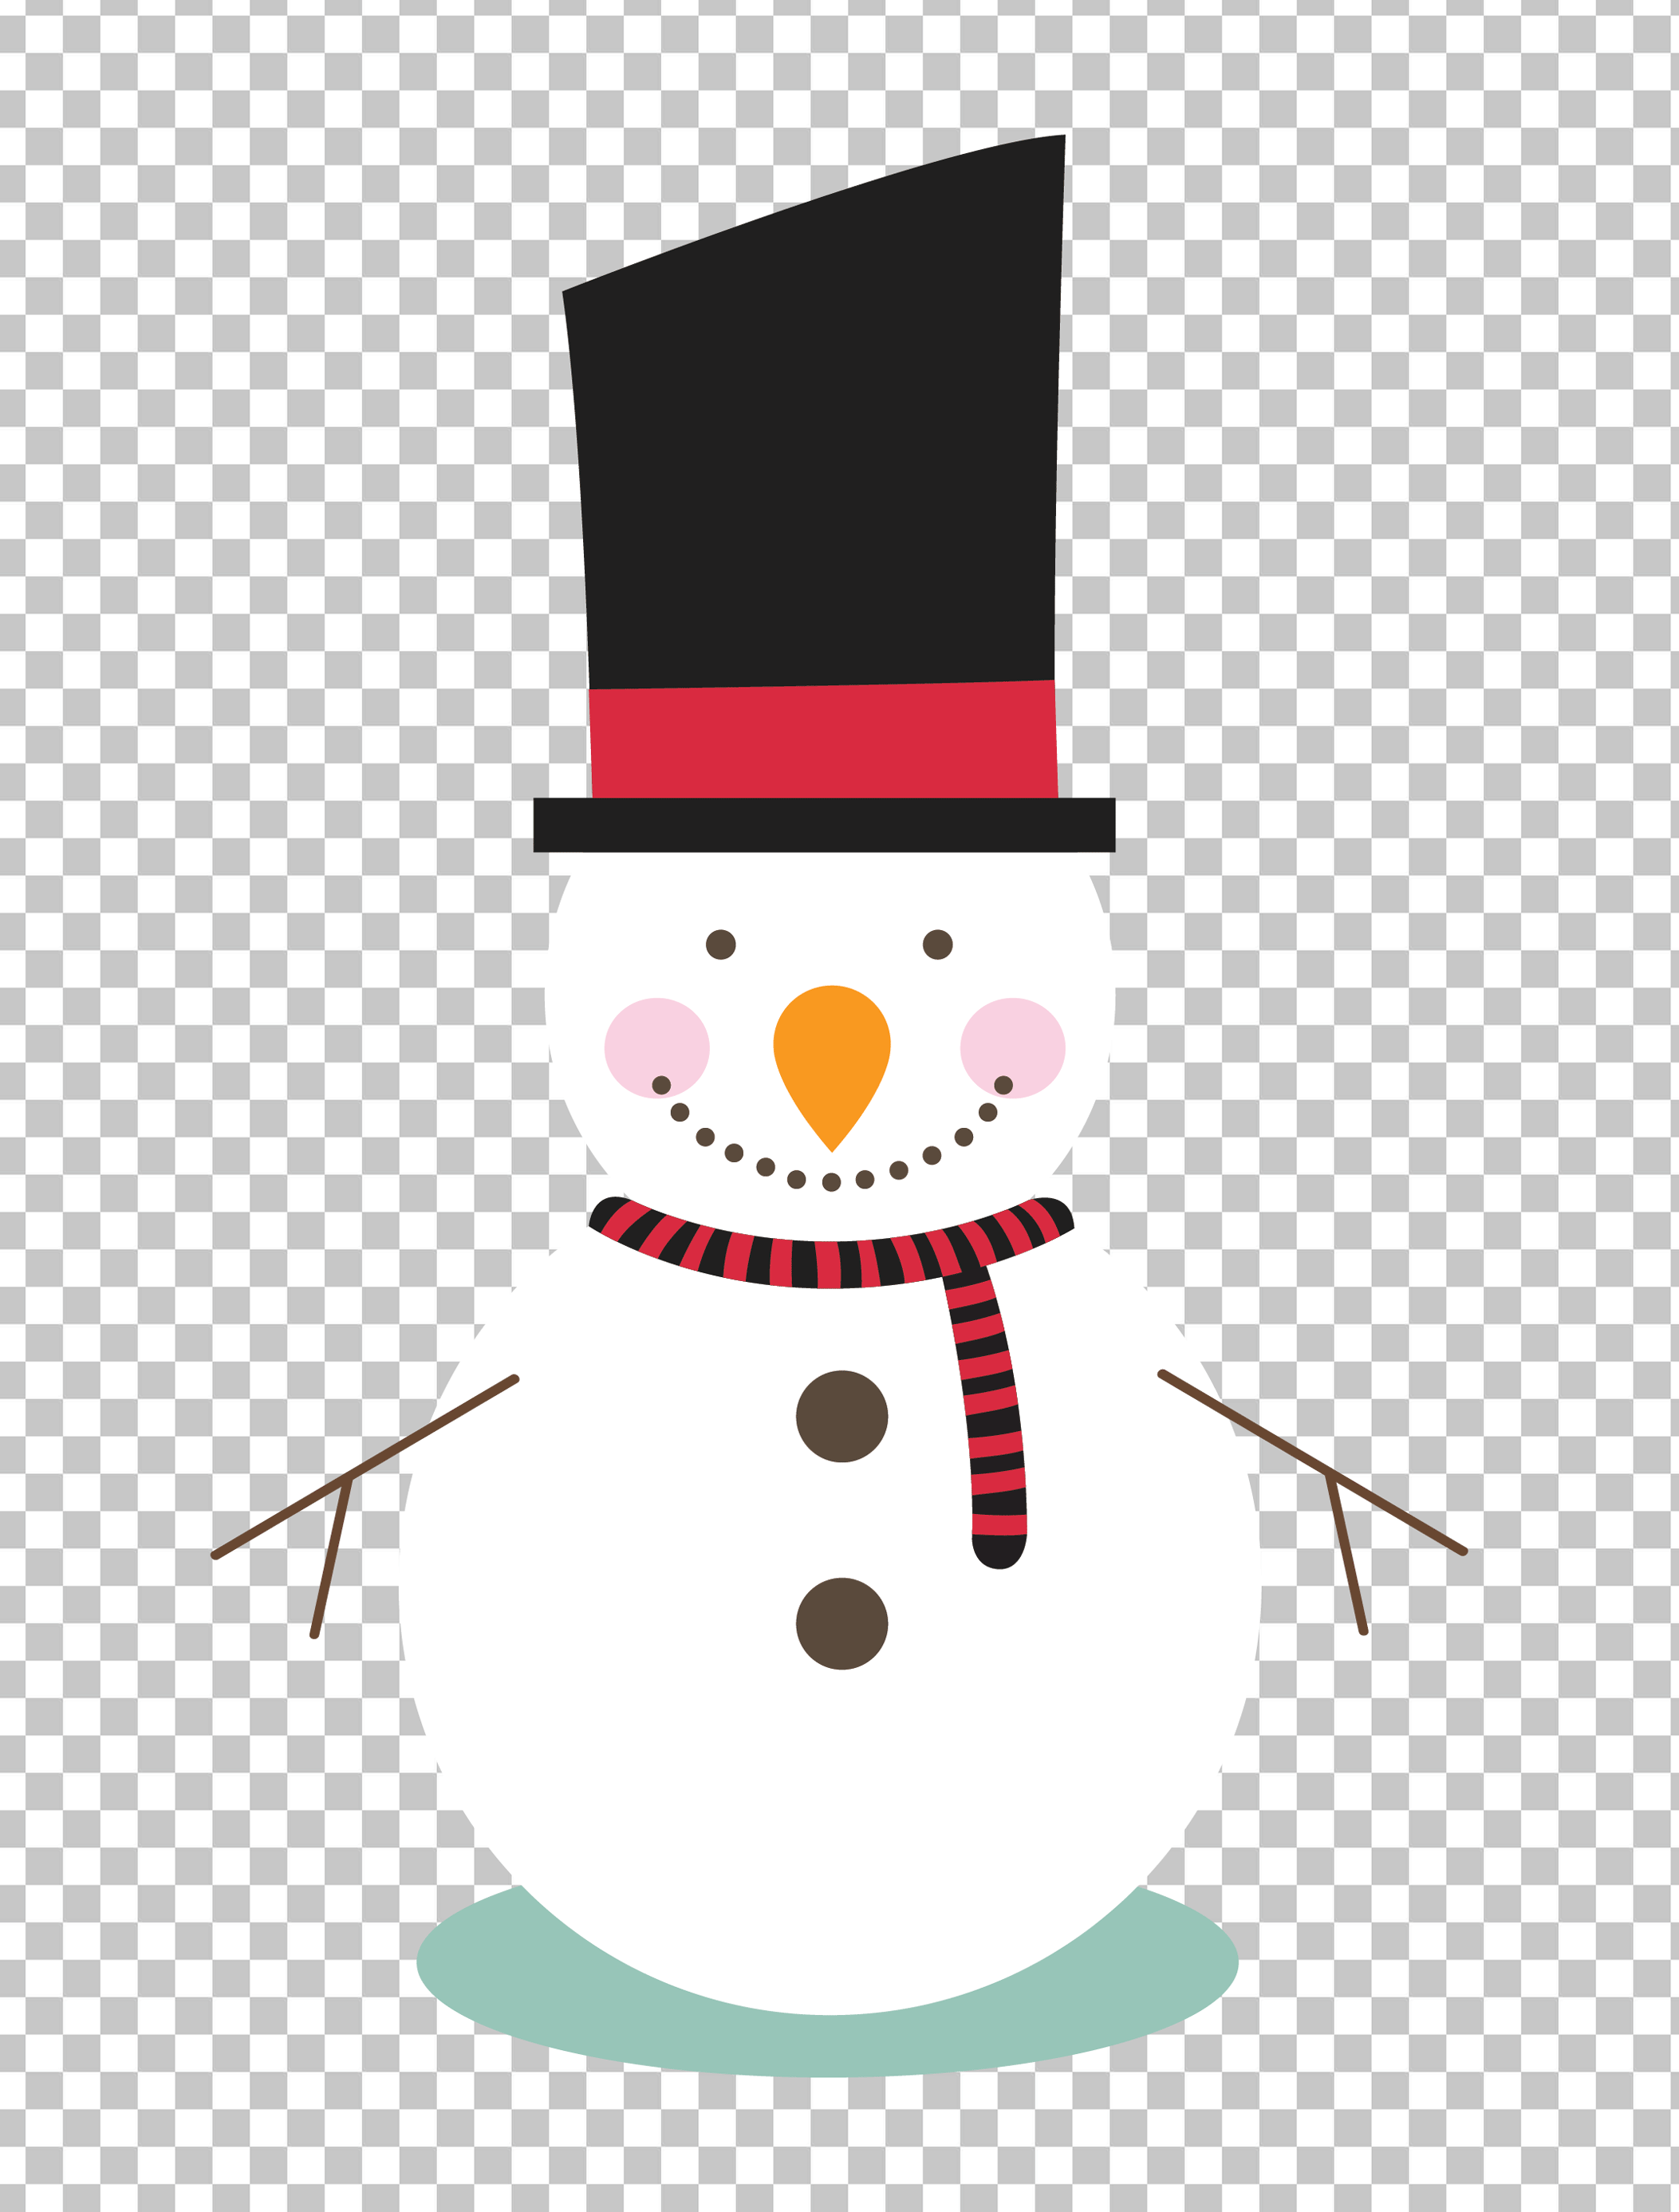 Snowman with Top Hat and Scarf PNG Image